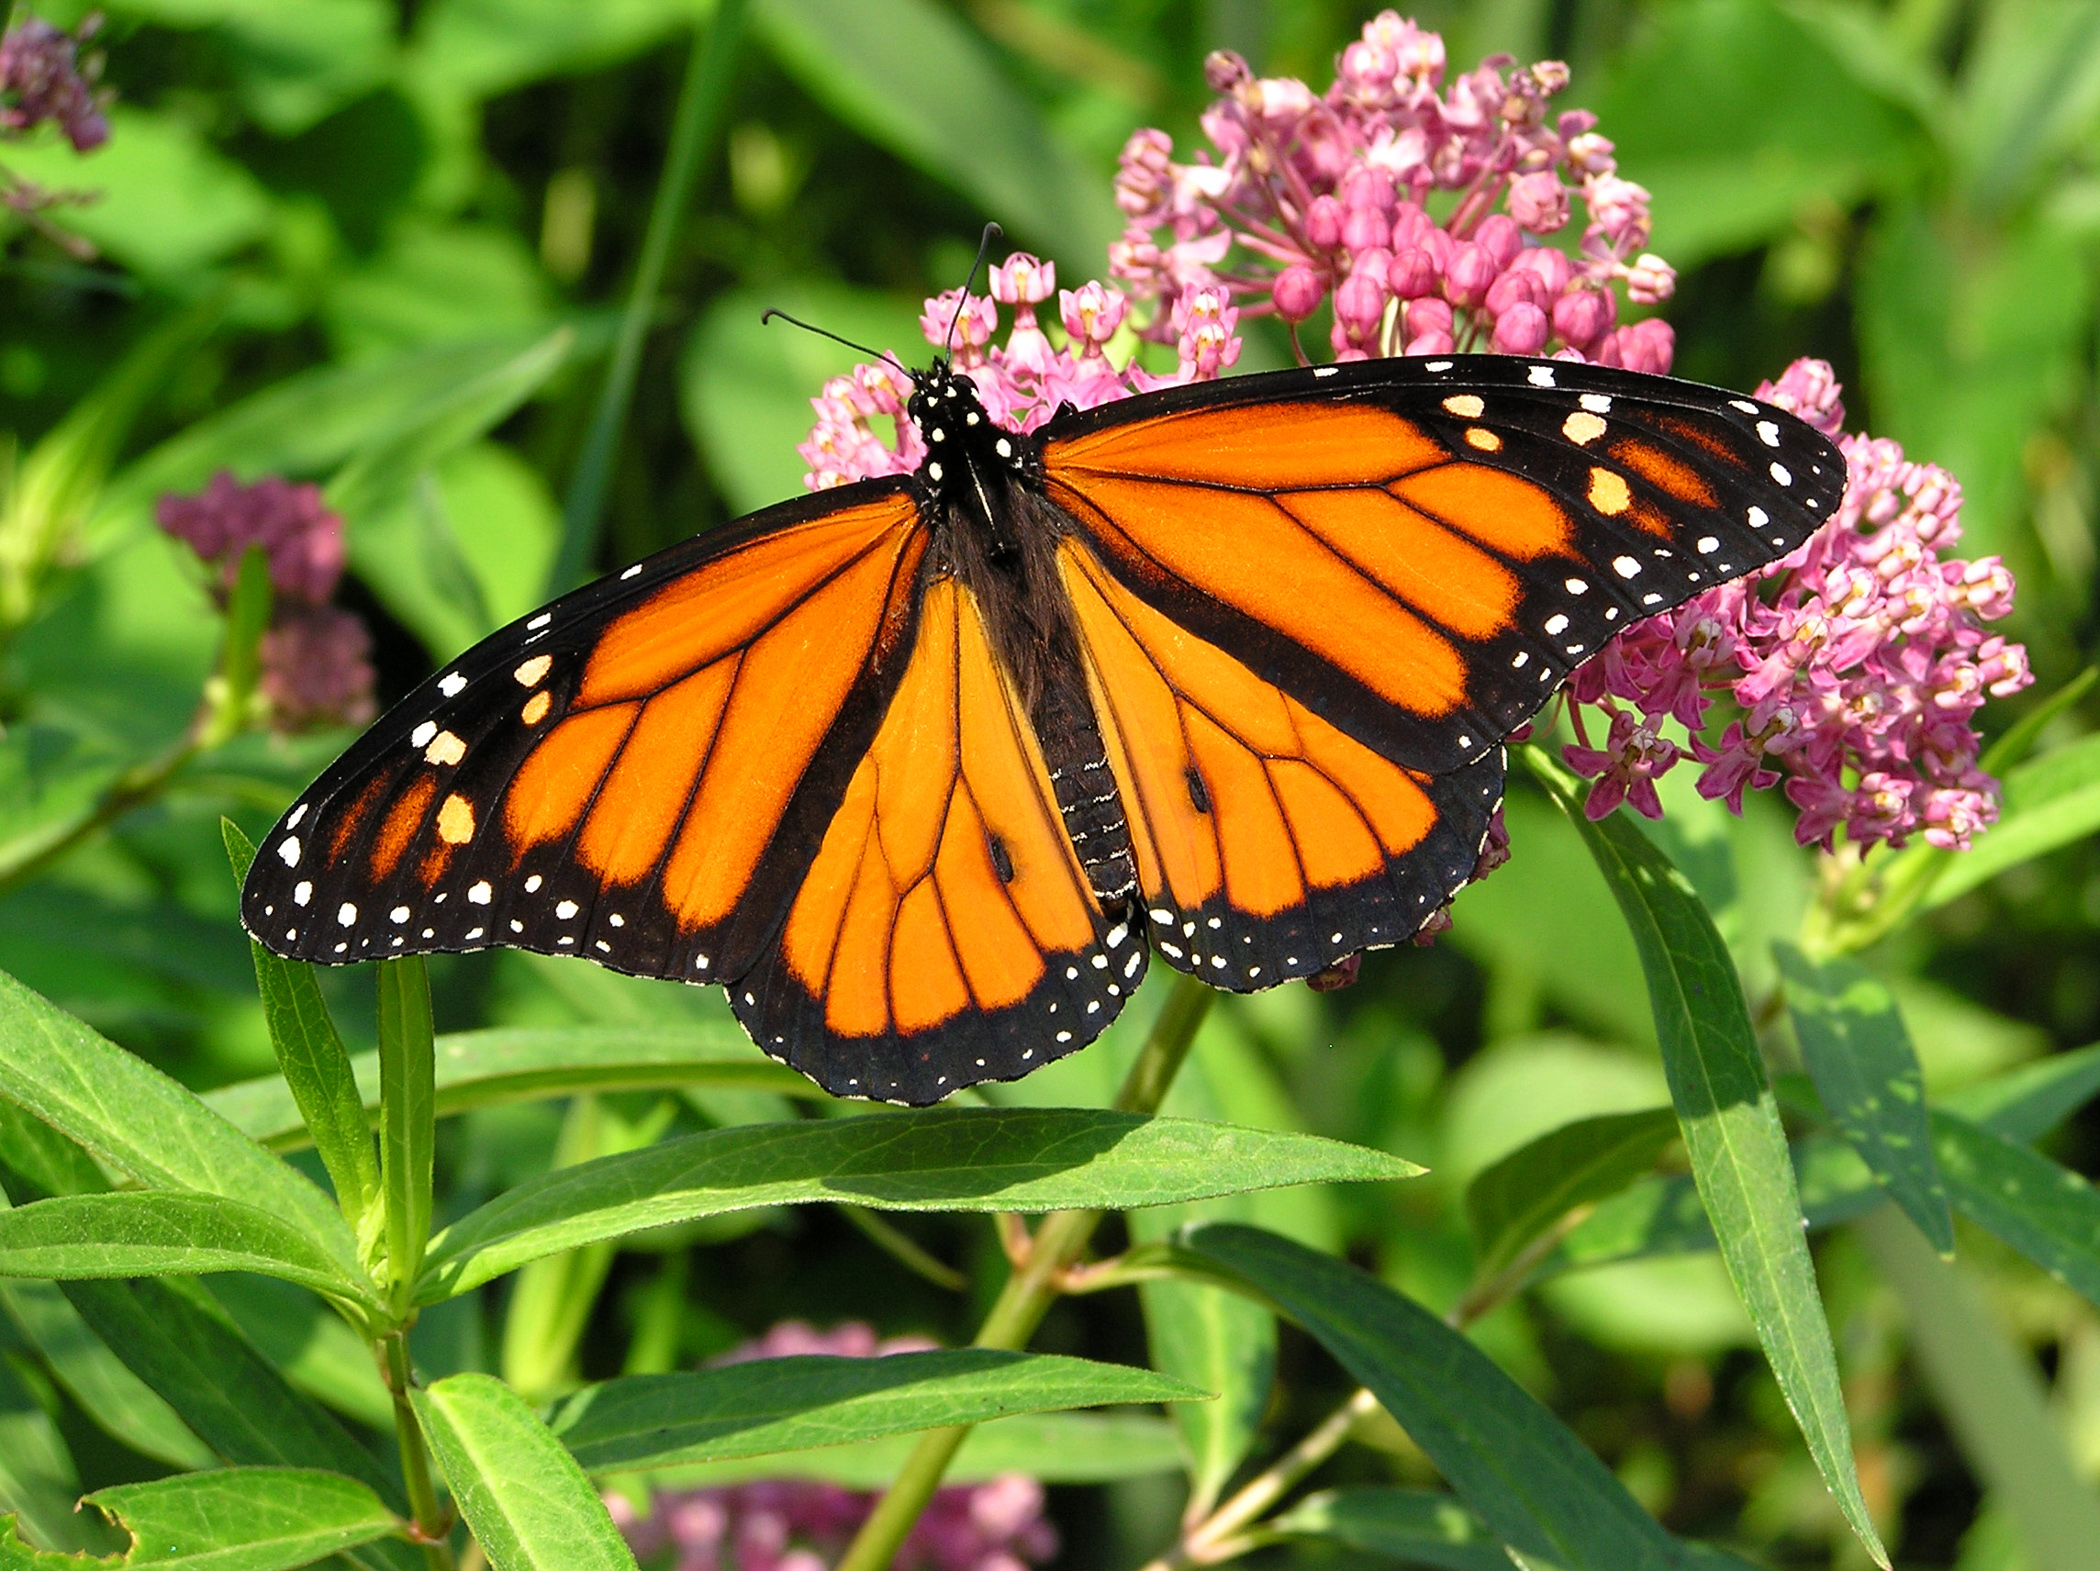 Monarch Butterfly with its wings spread out